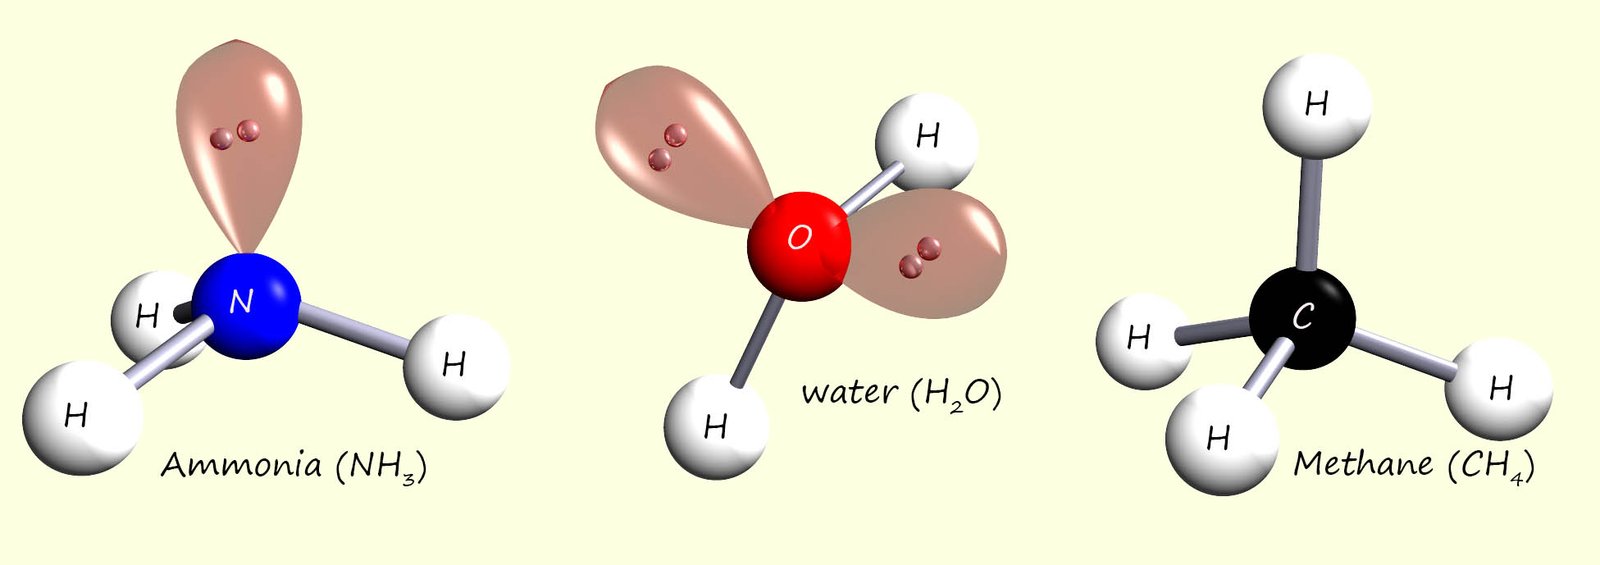 3d models of ammonia, methane and water showing the bond angles and lone pairs of electrons in the molecules